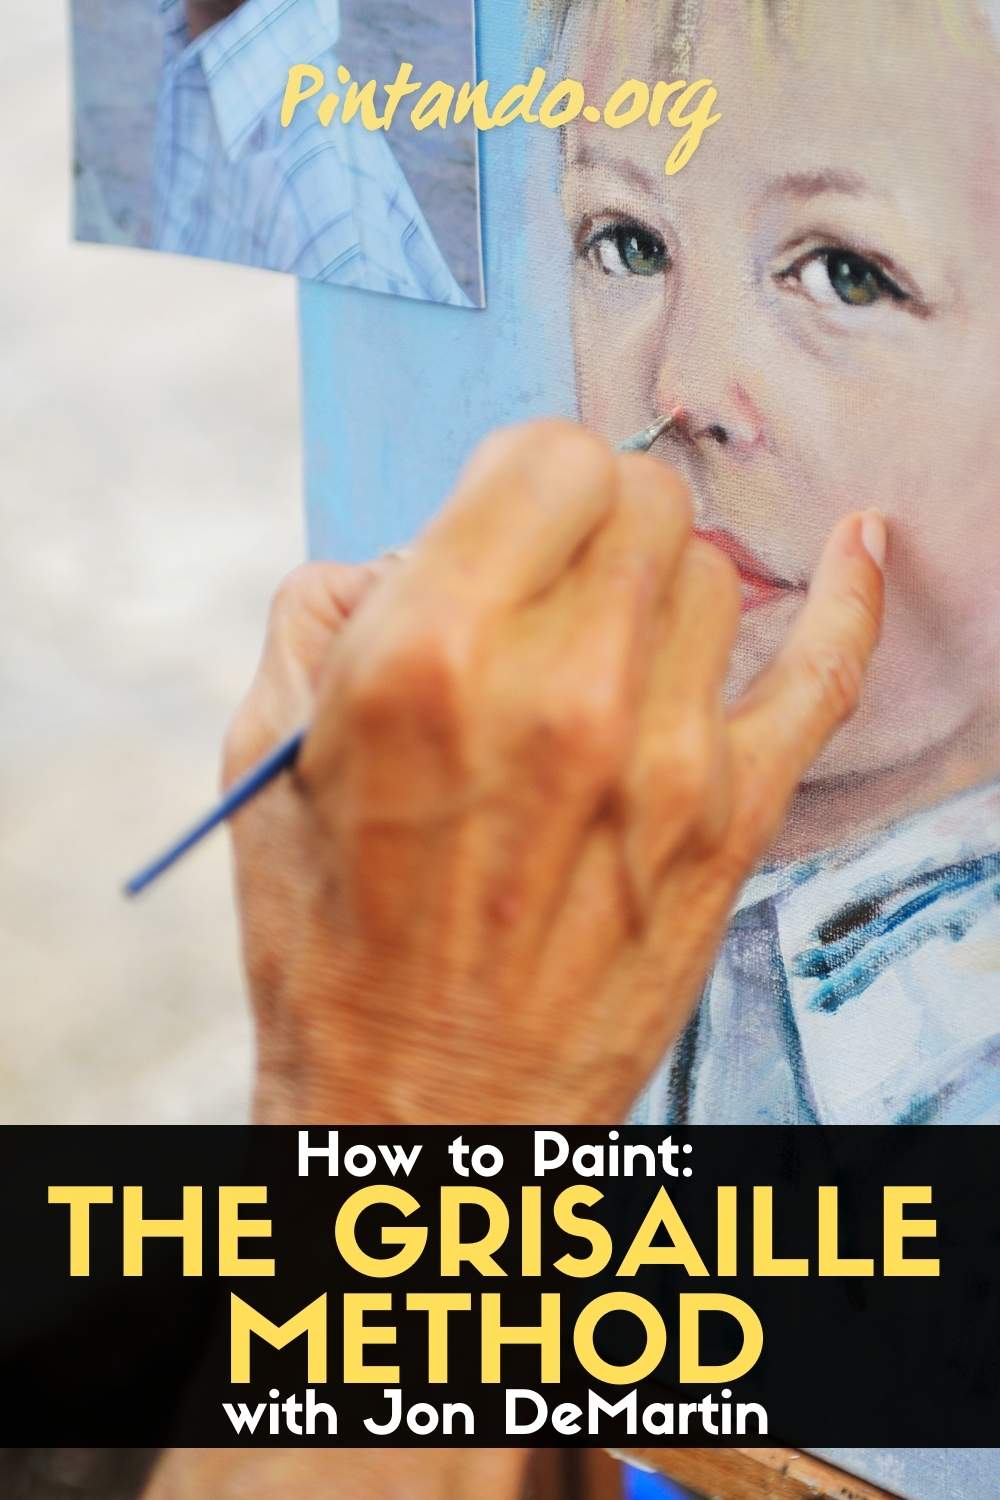 _How to Paint The Grisaille Method with Jon DeMartin